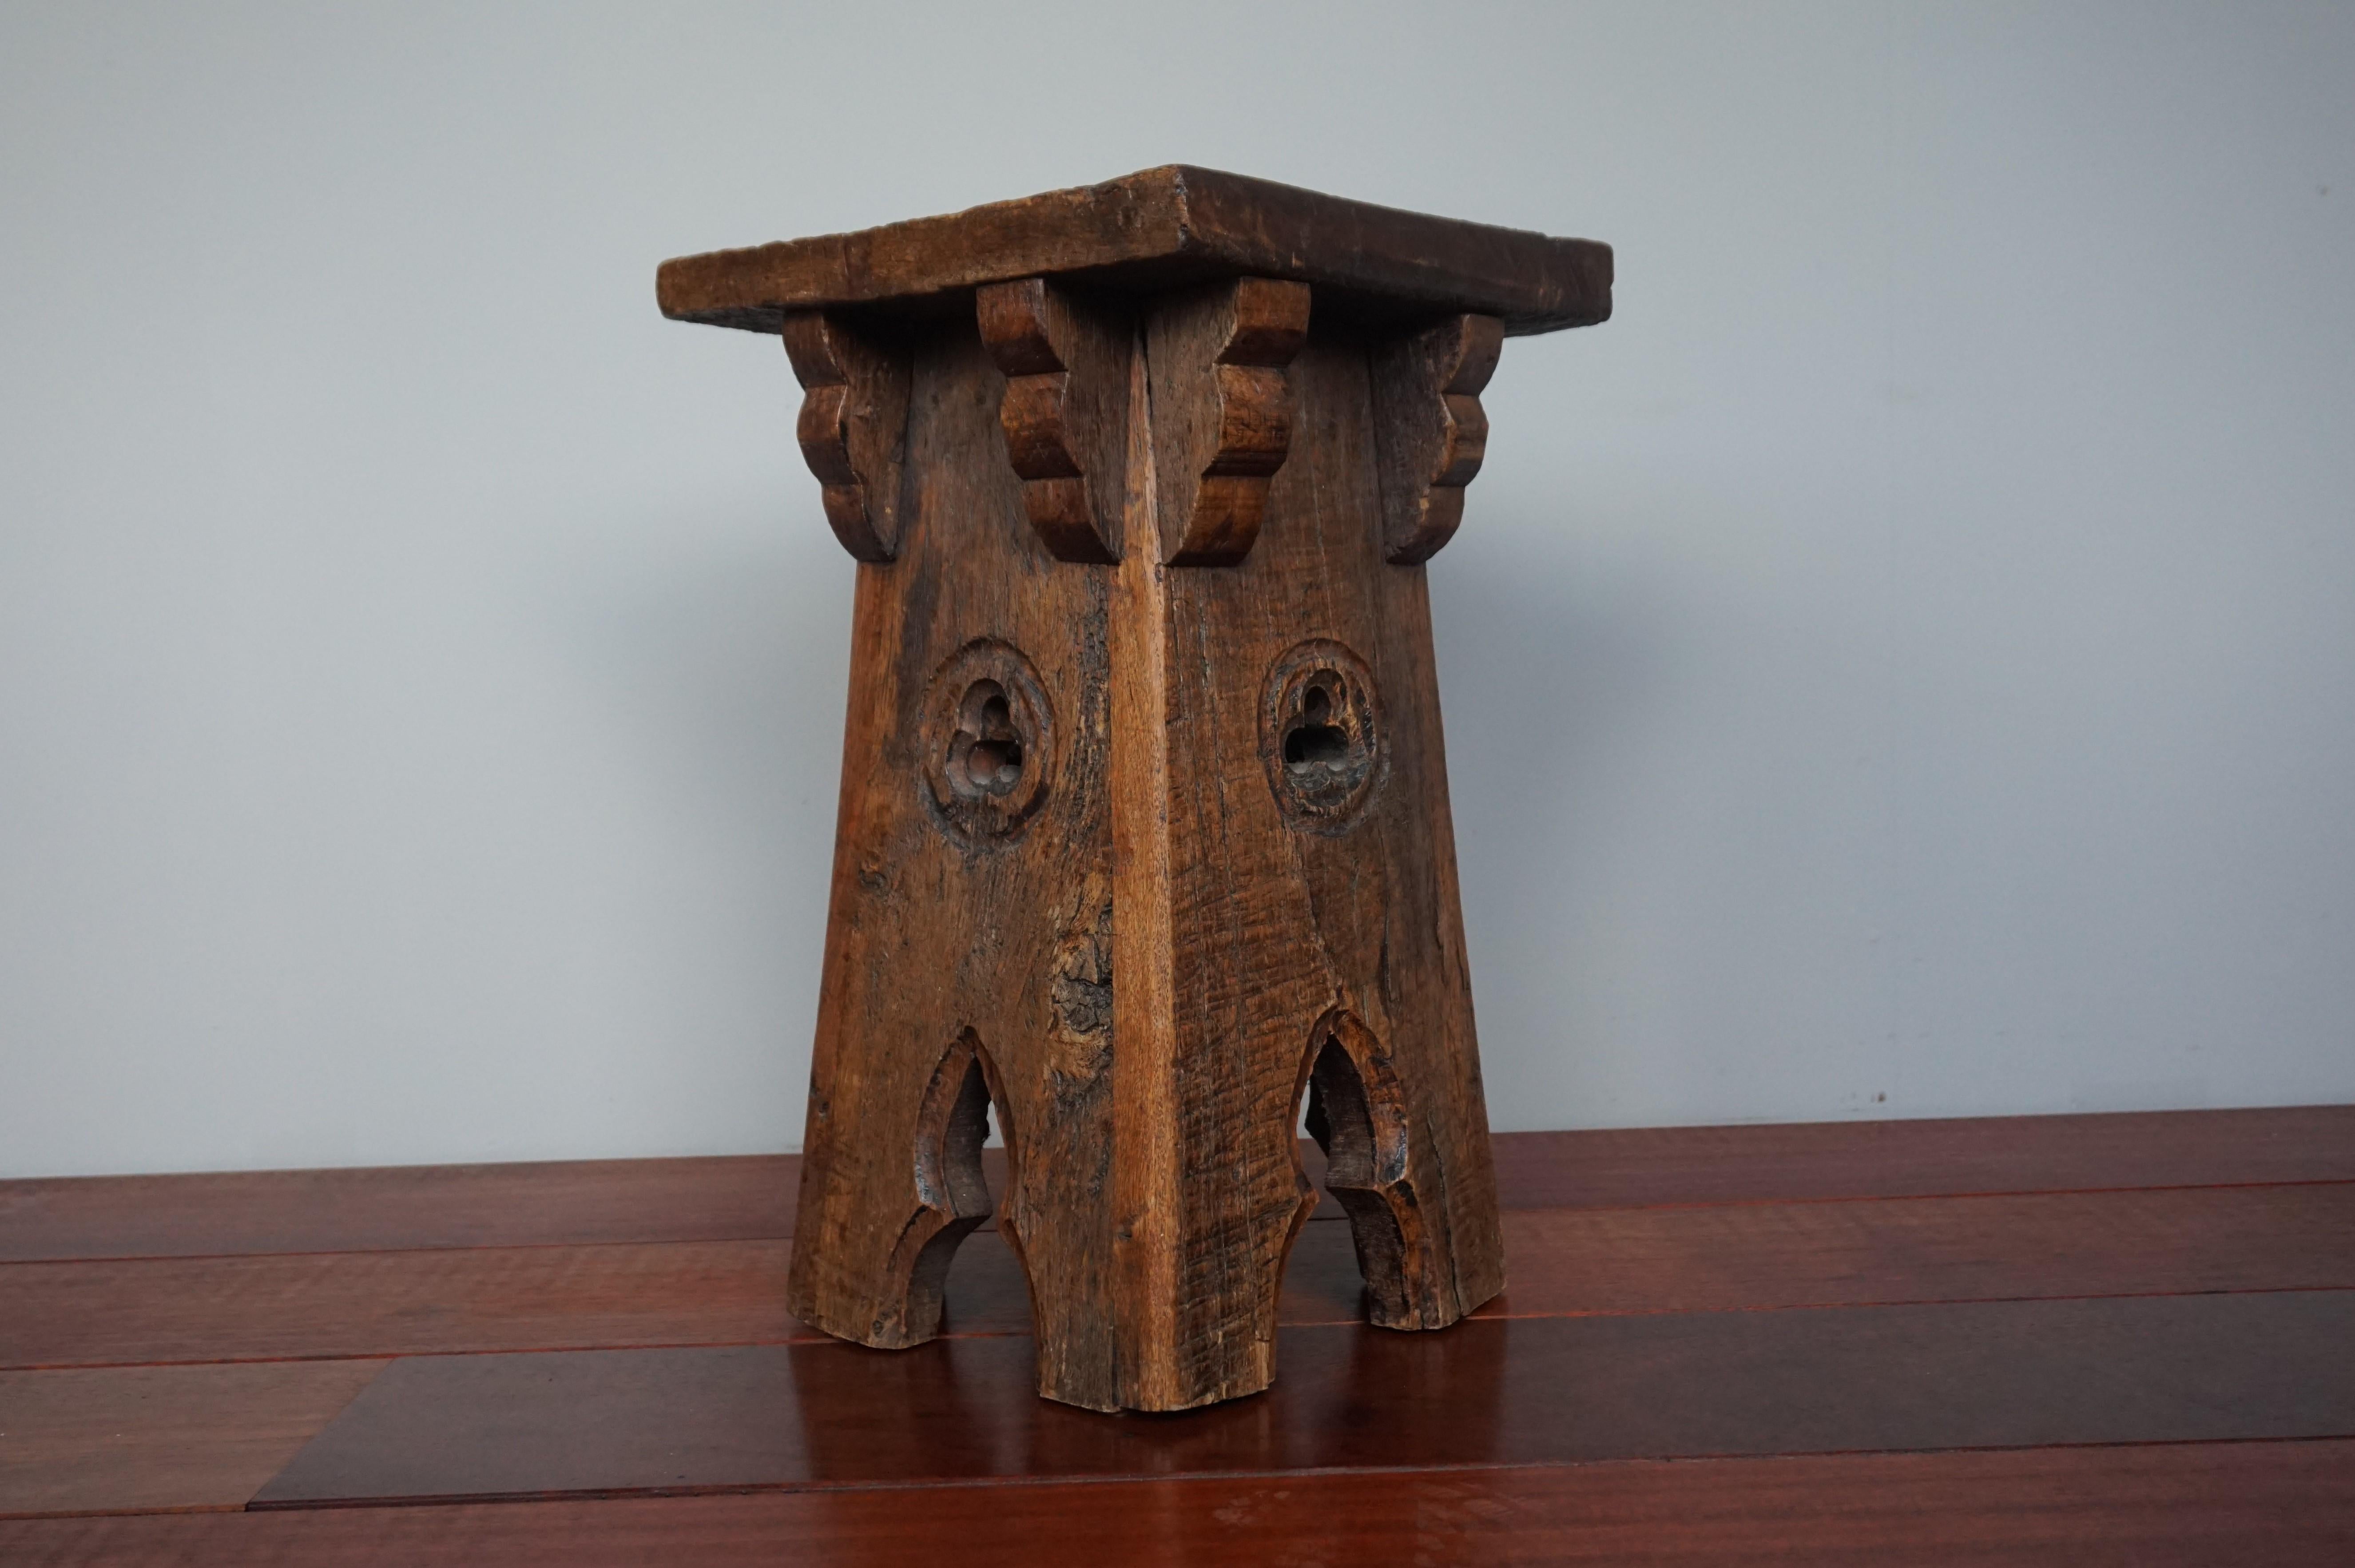 Truly medieval looking, little antique table in the Gothic style.

This Gothic Revival table very much looks like a 17th or 18th century specimen. However, we are certain that this table was created in the early 1900s using very old oakwood.